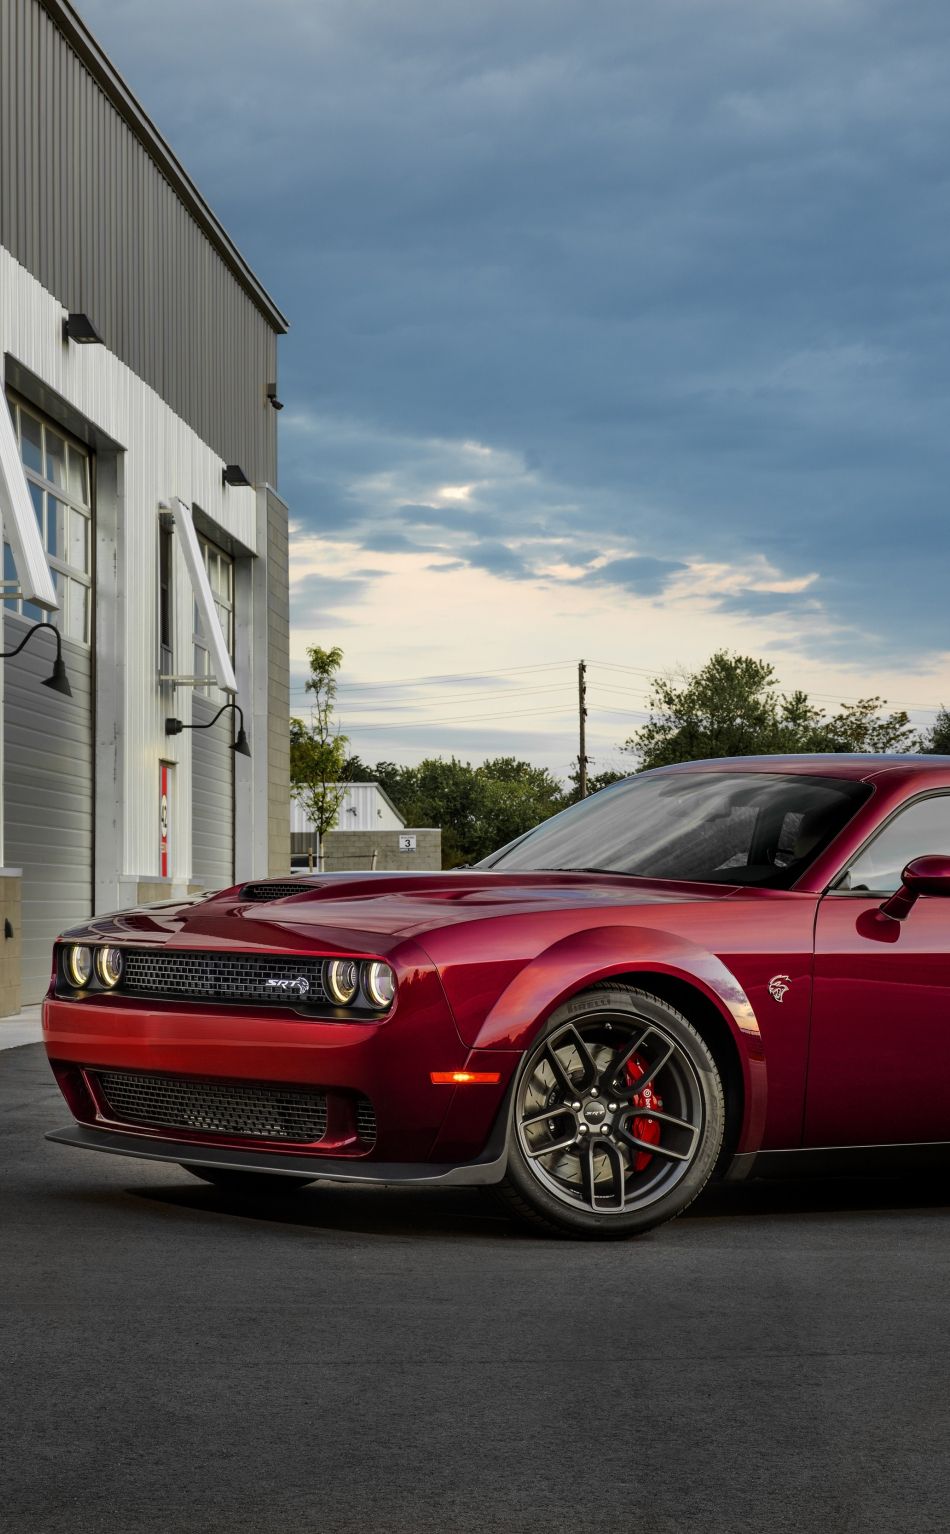 Download 950x1534 Wallpaper Dodge Challenger Demon Srt, Blood Red, Muscle Car, Iphone, 950x1534 HD Image, Background, 19533